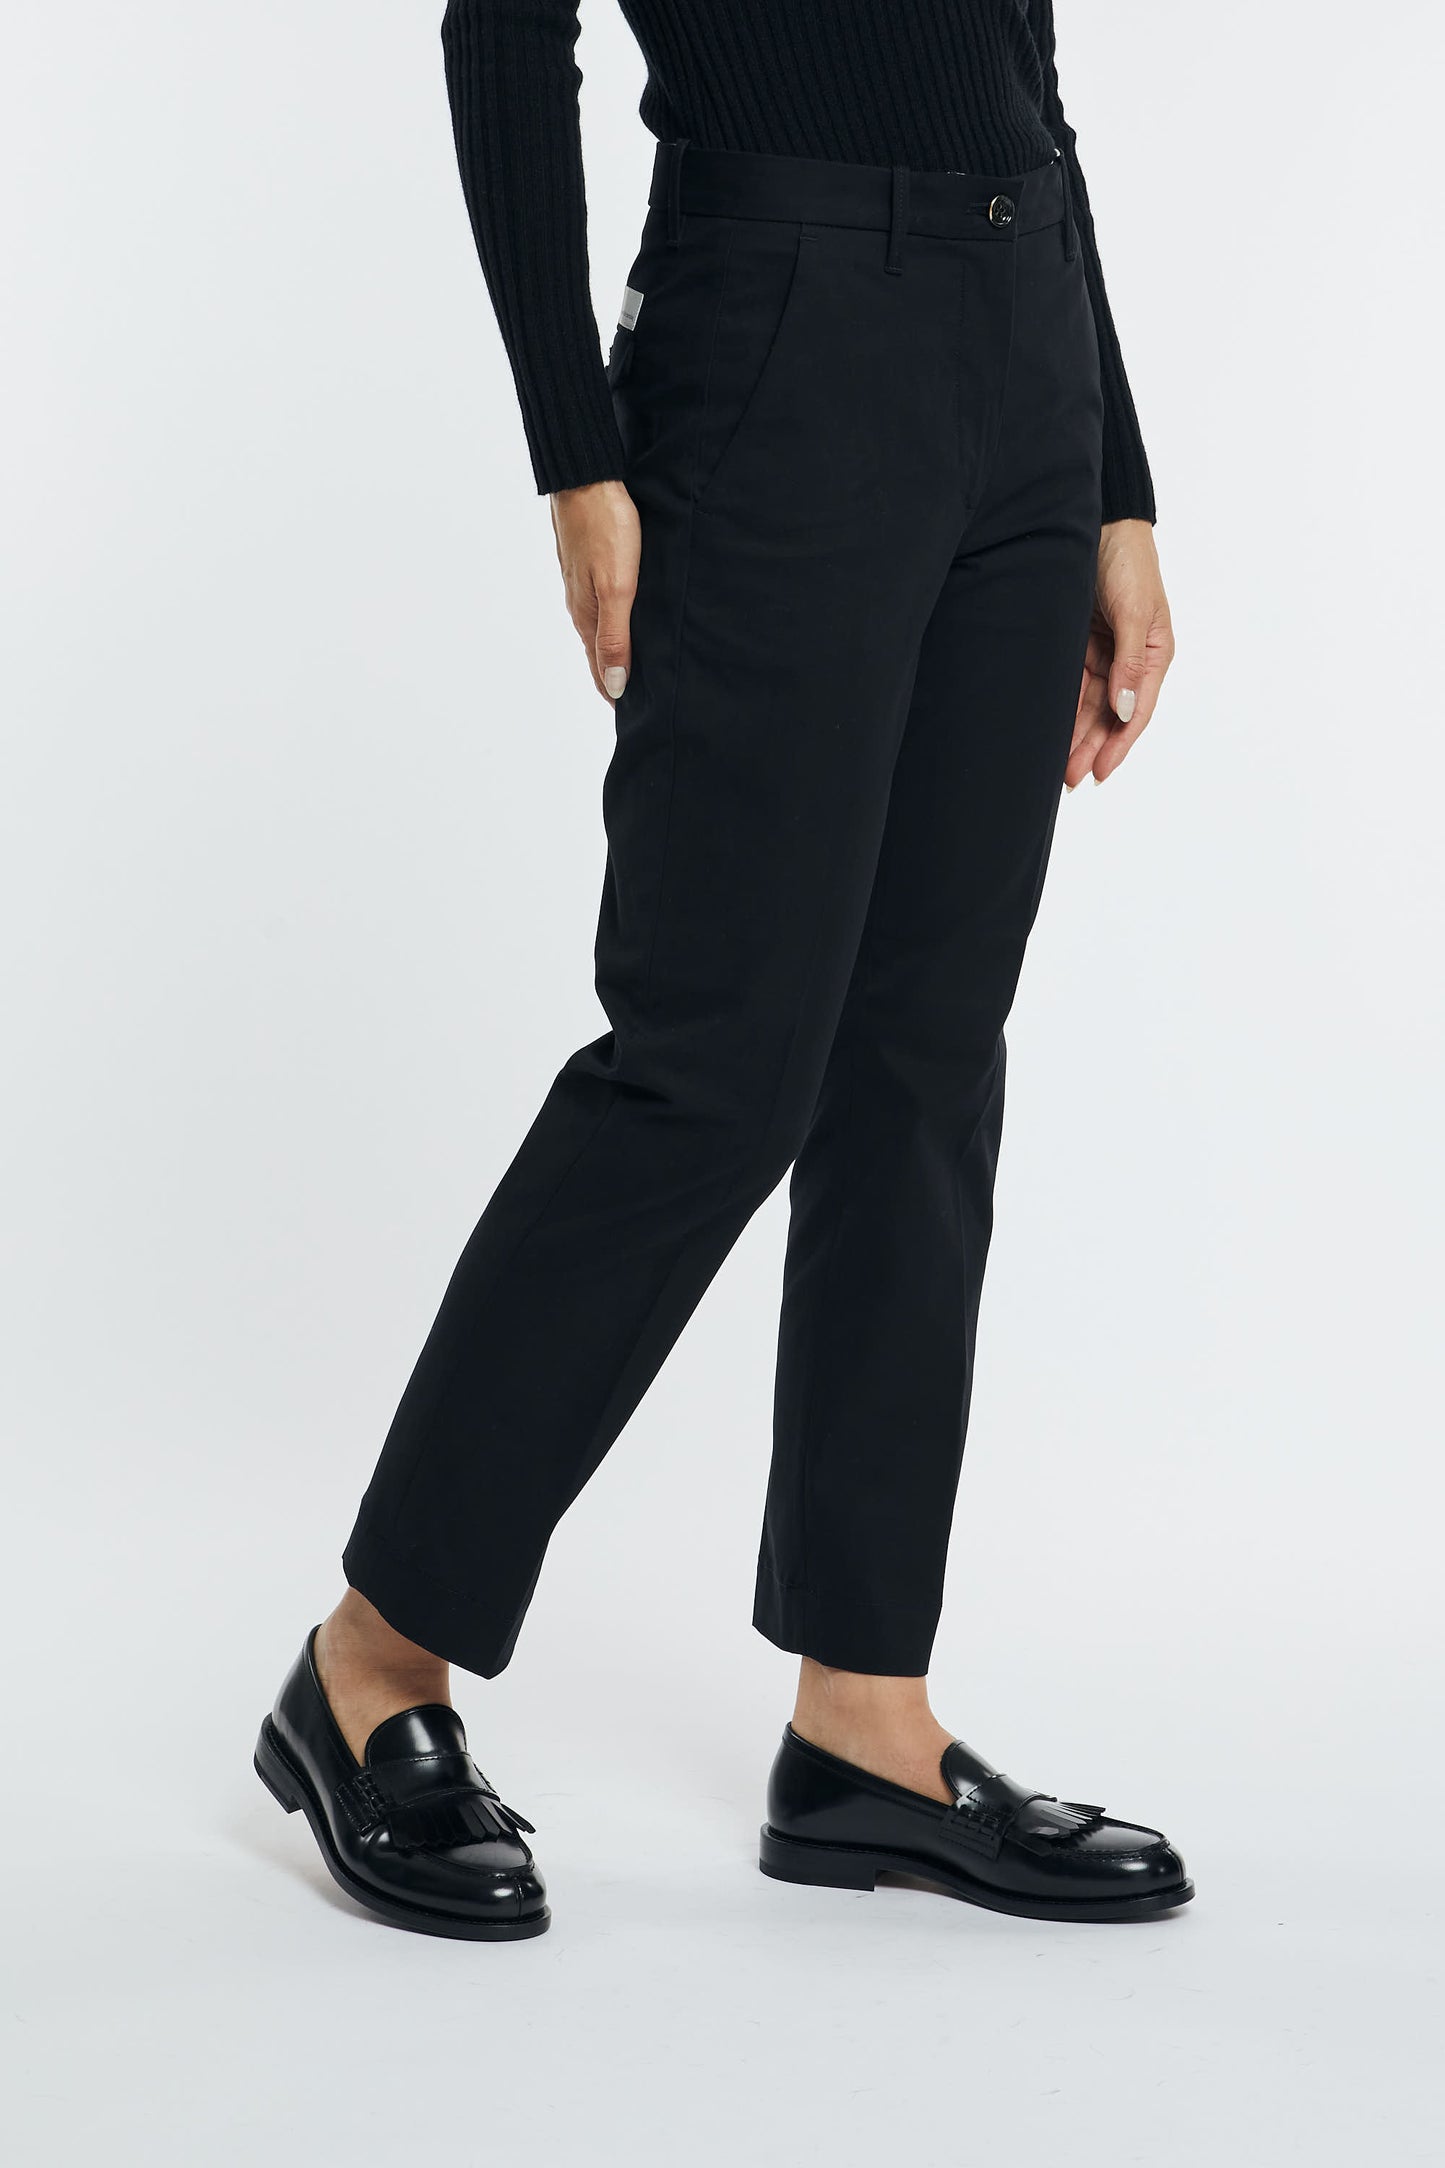  Nine In The Morning Women's Black Trousers Nero Donna - 3